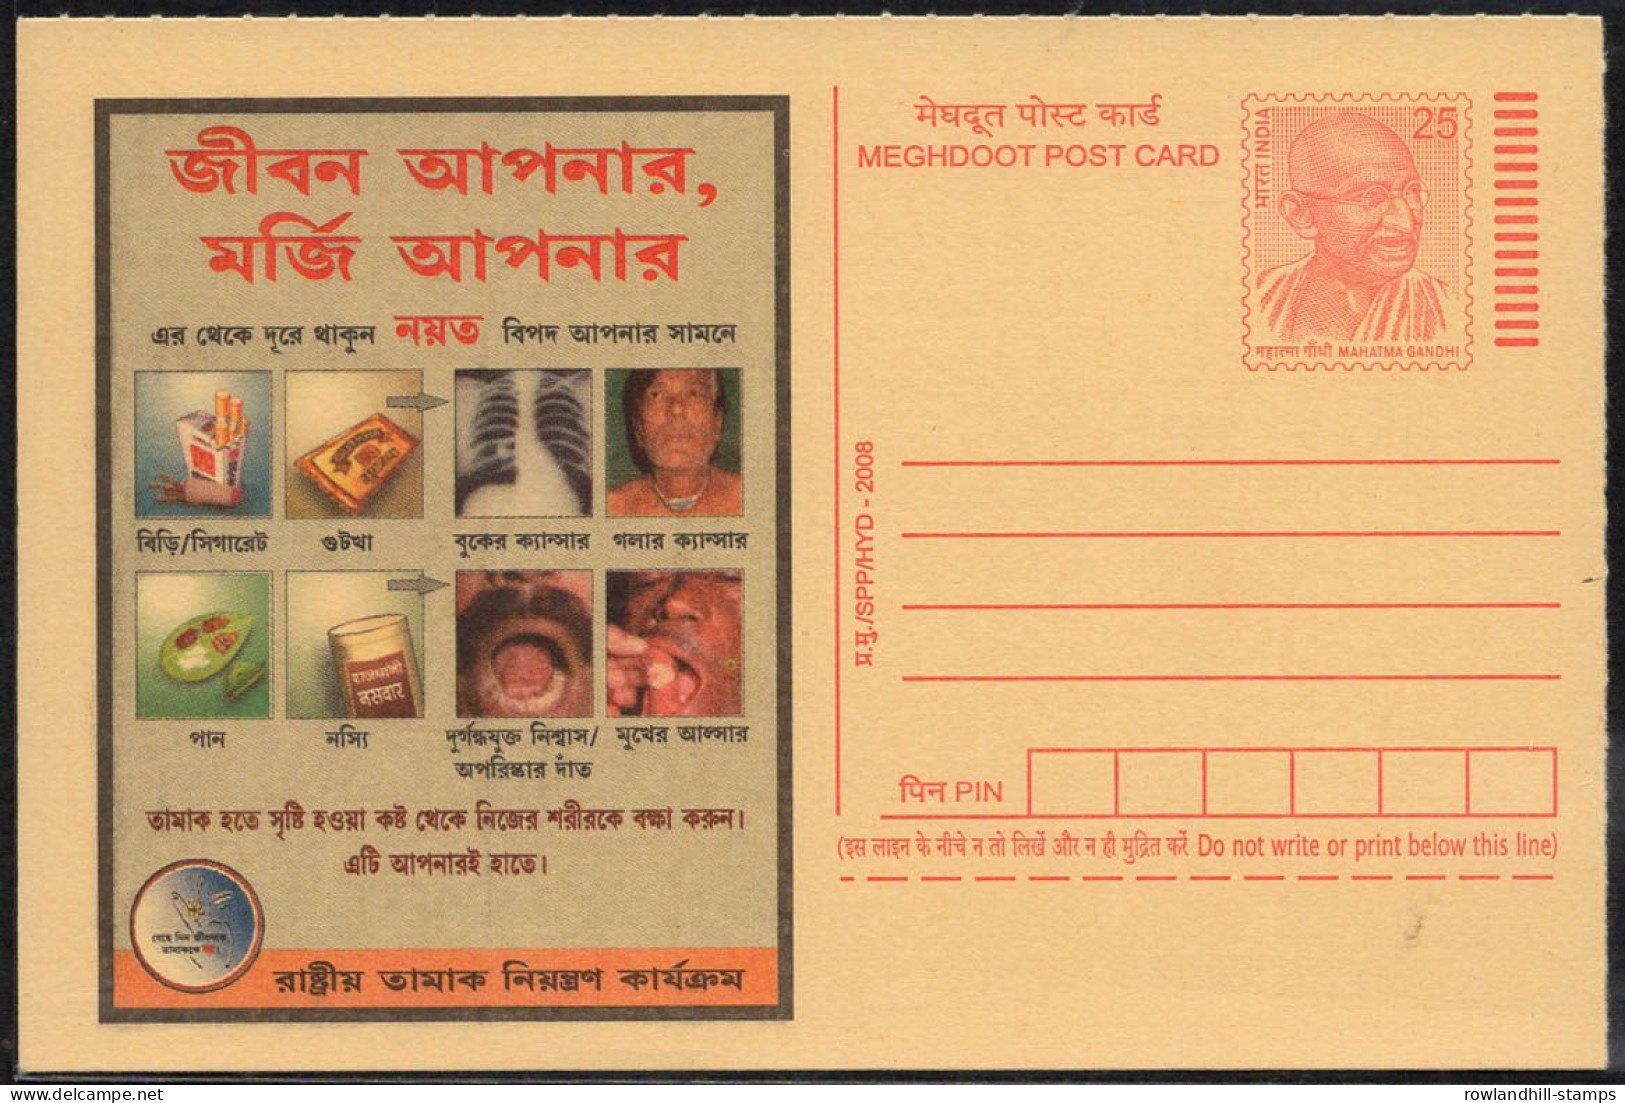 INDIA, 2008, Stop SMOKING, Tobacco, Meghdoot POST CARD, Unused, Stationery, Cigarette, Cancer, Disease Drugs, X-ray, A23 - Droga